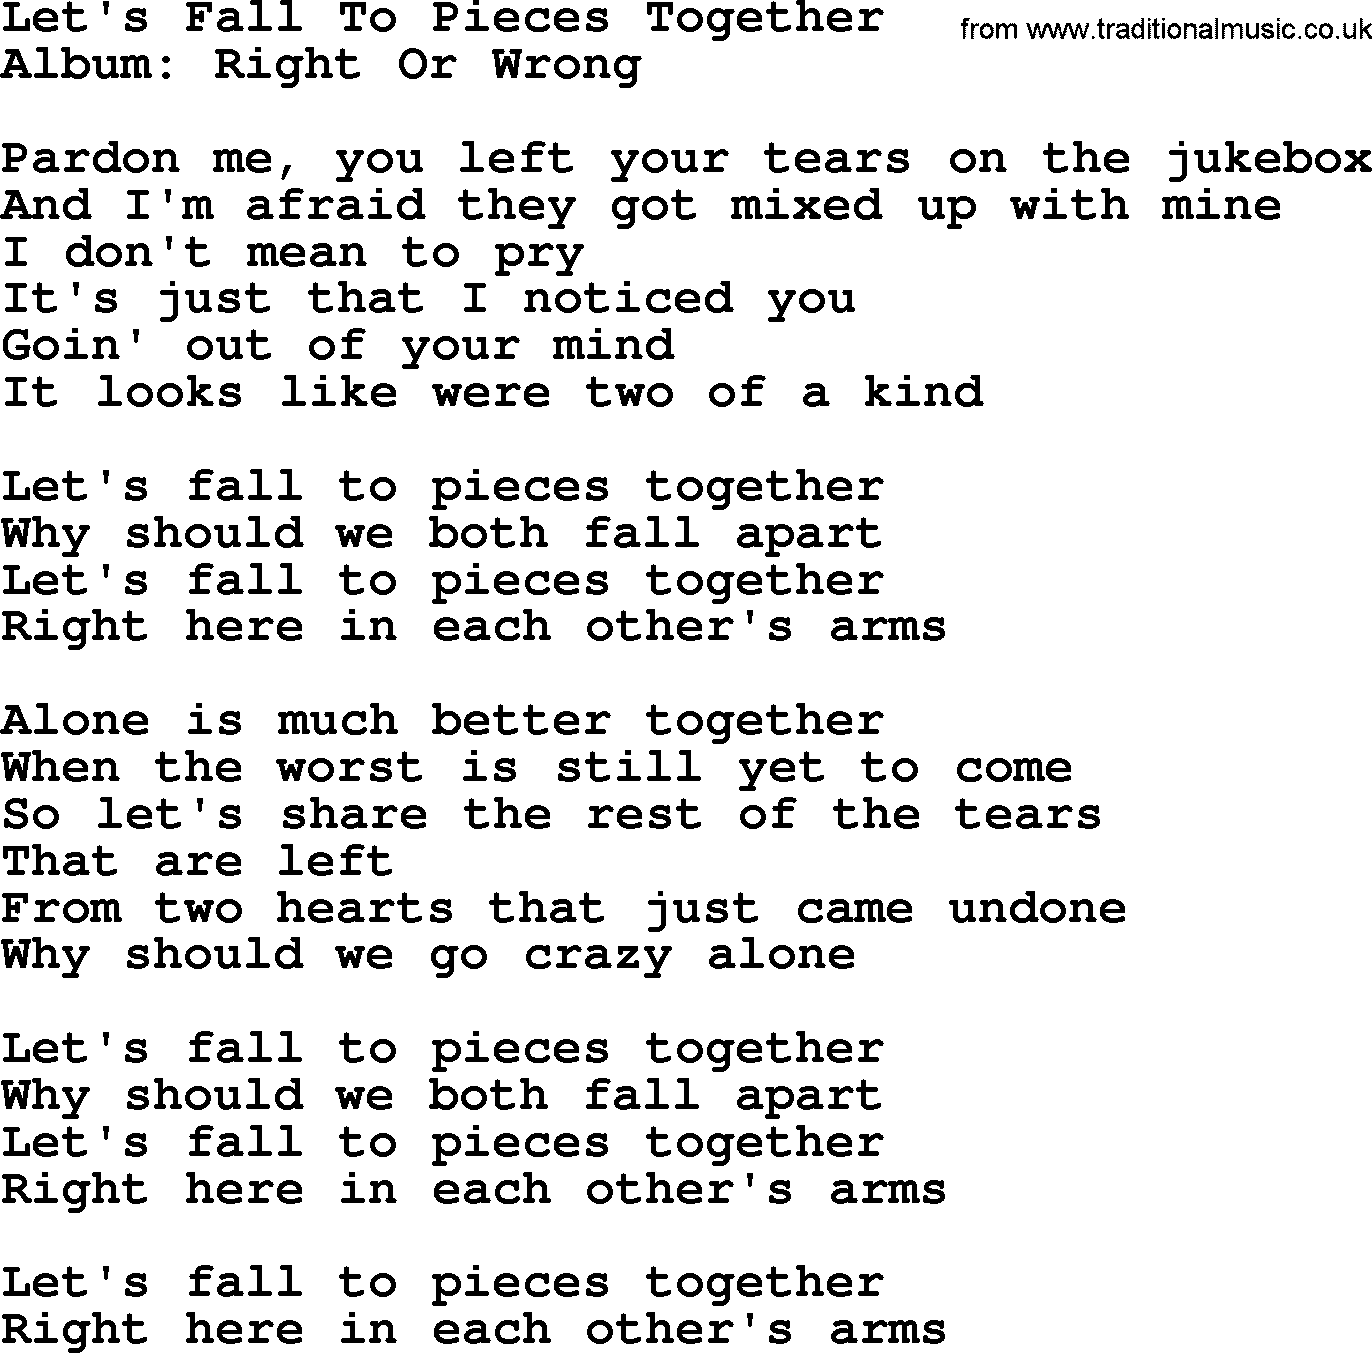 George Strait song: Let's Fall To Pieces Together, lyrics